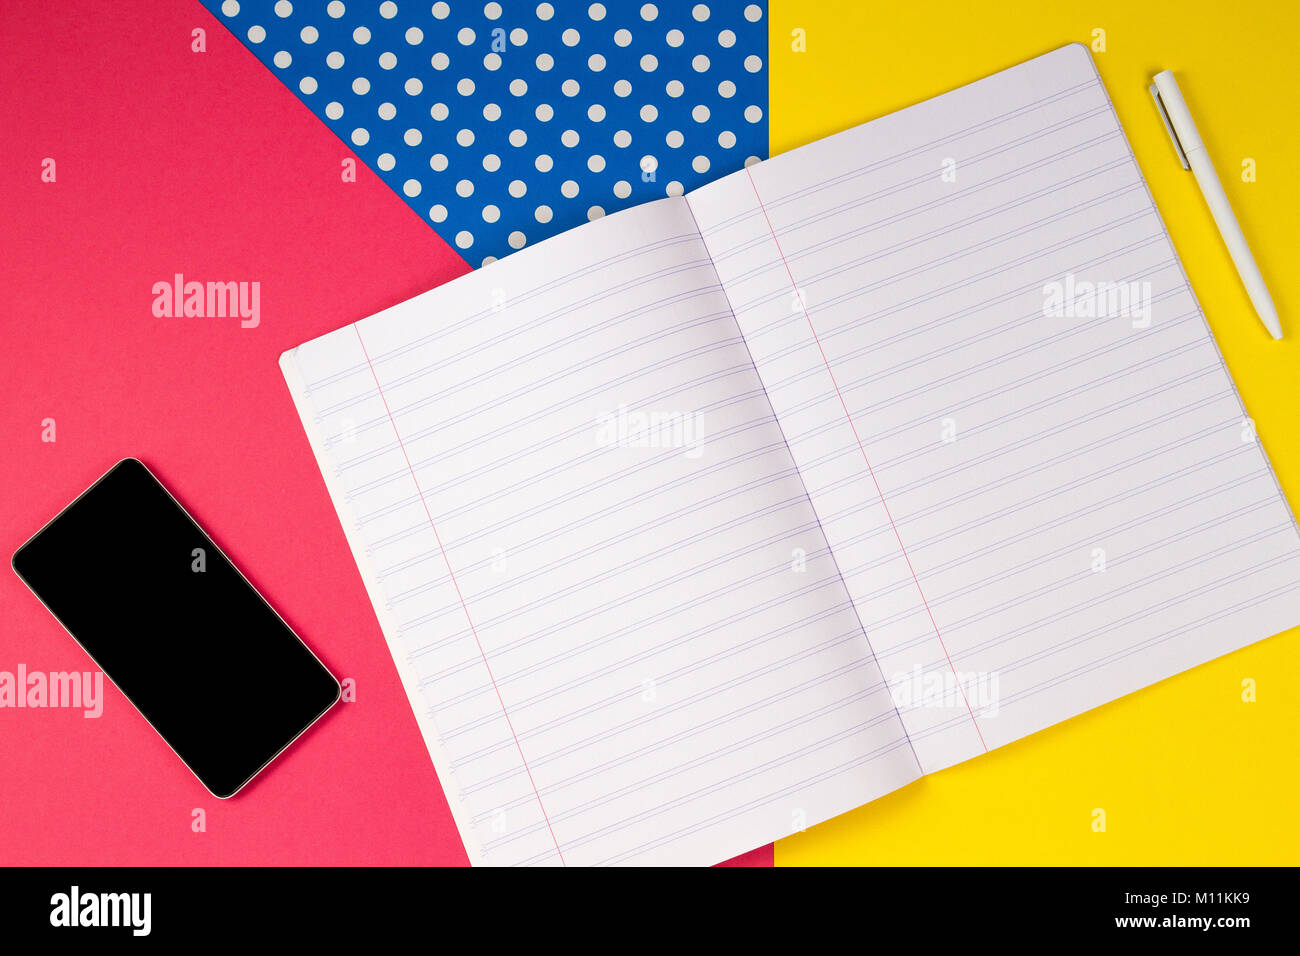 Mobile phone, open notebook and white pen on colorful background Stock Photo